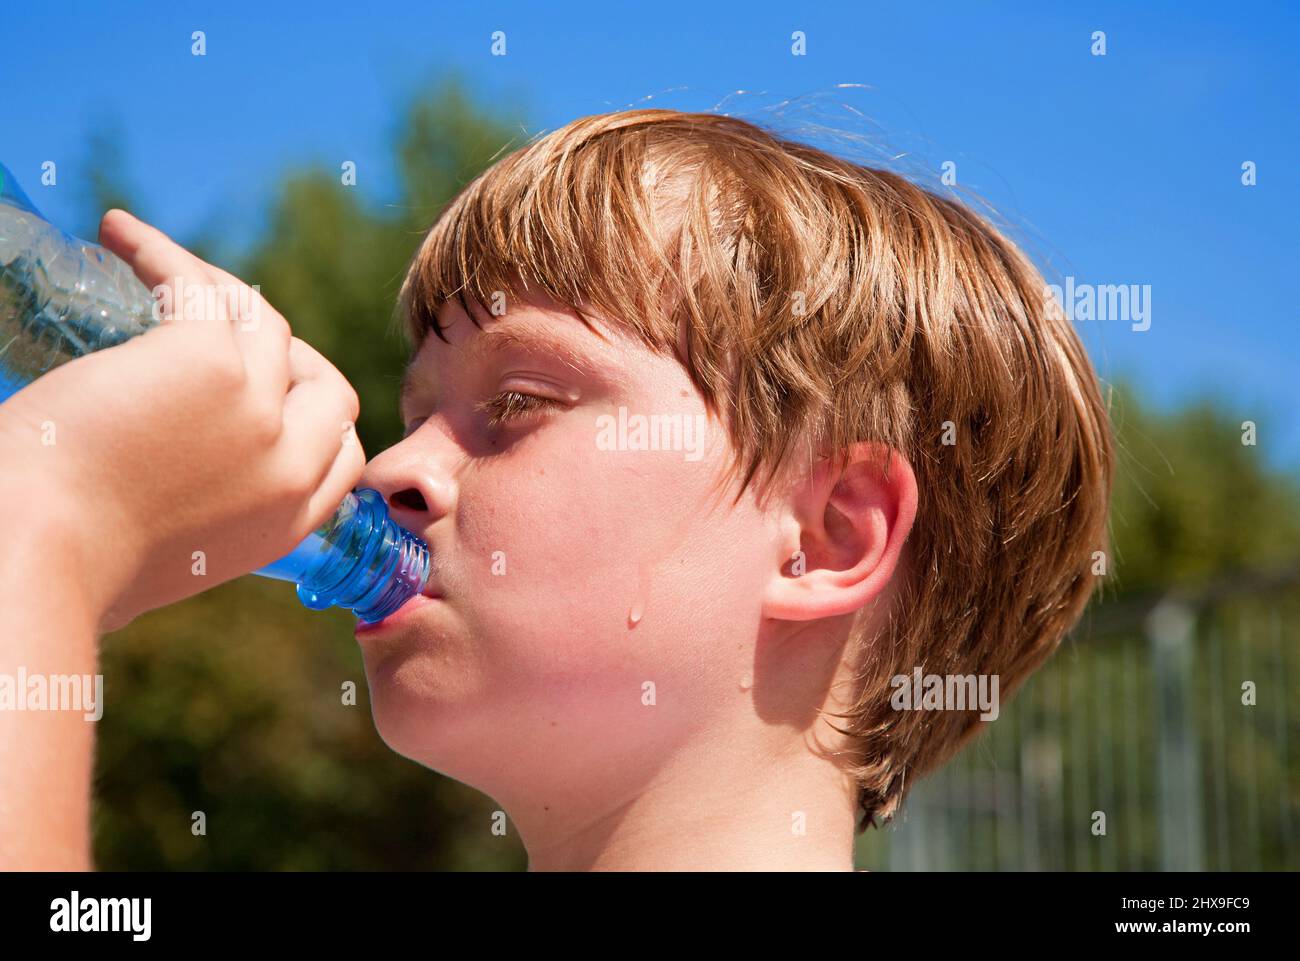 https://c8.alamy.com/comp/2HX9FC9/young-boy-drinks-water-out-of-a-bottle-after-sports-2HX9FC9.jpg